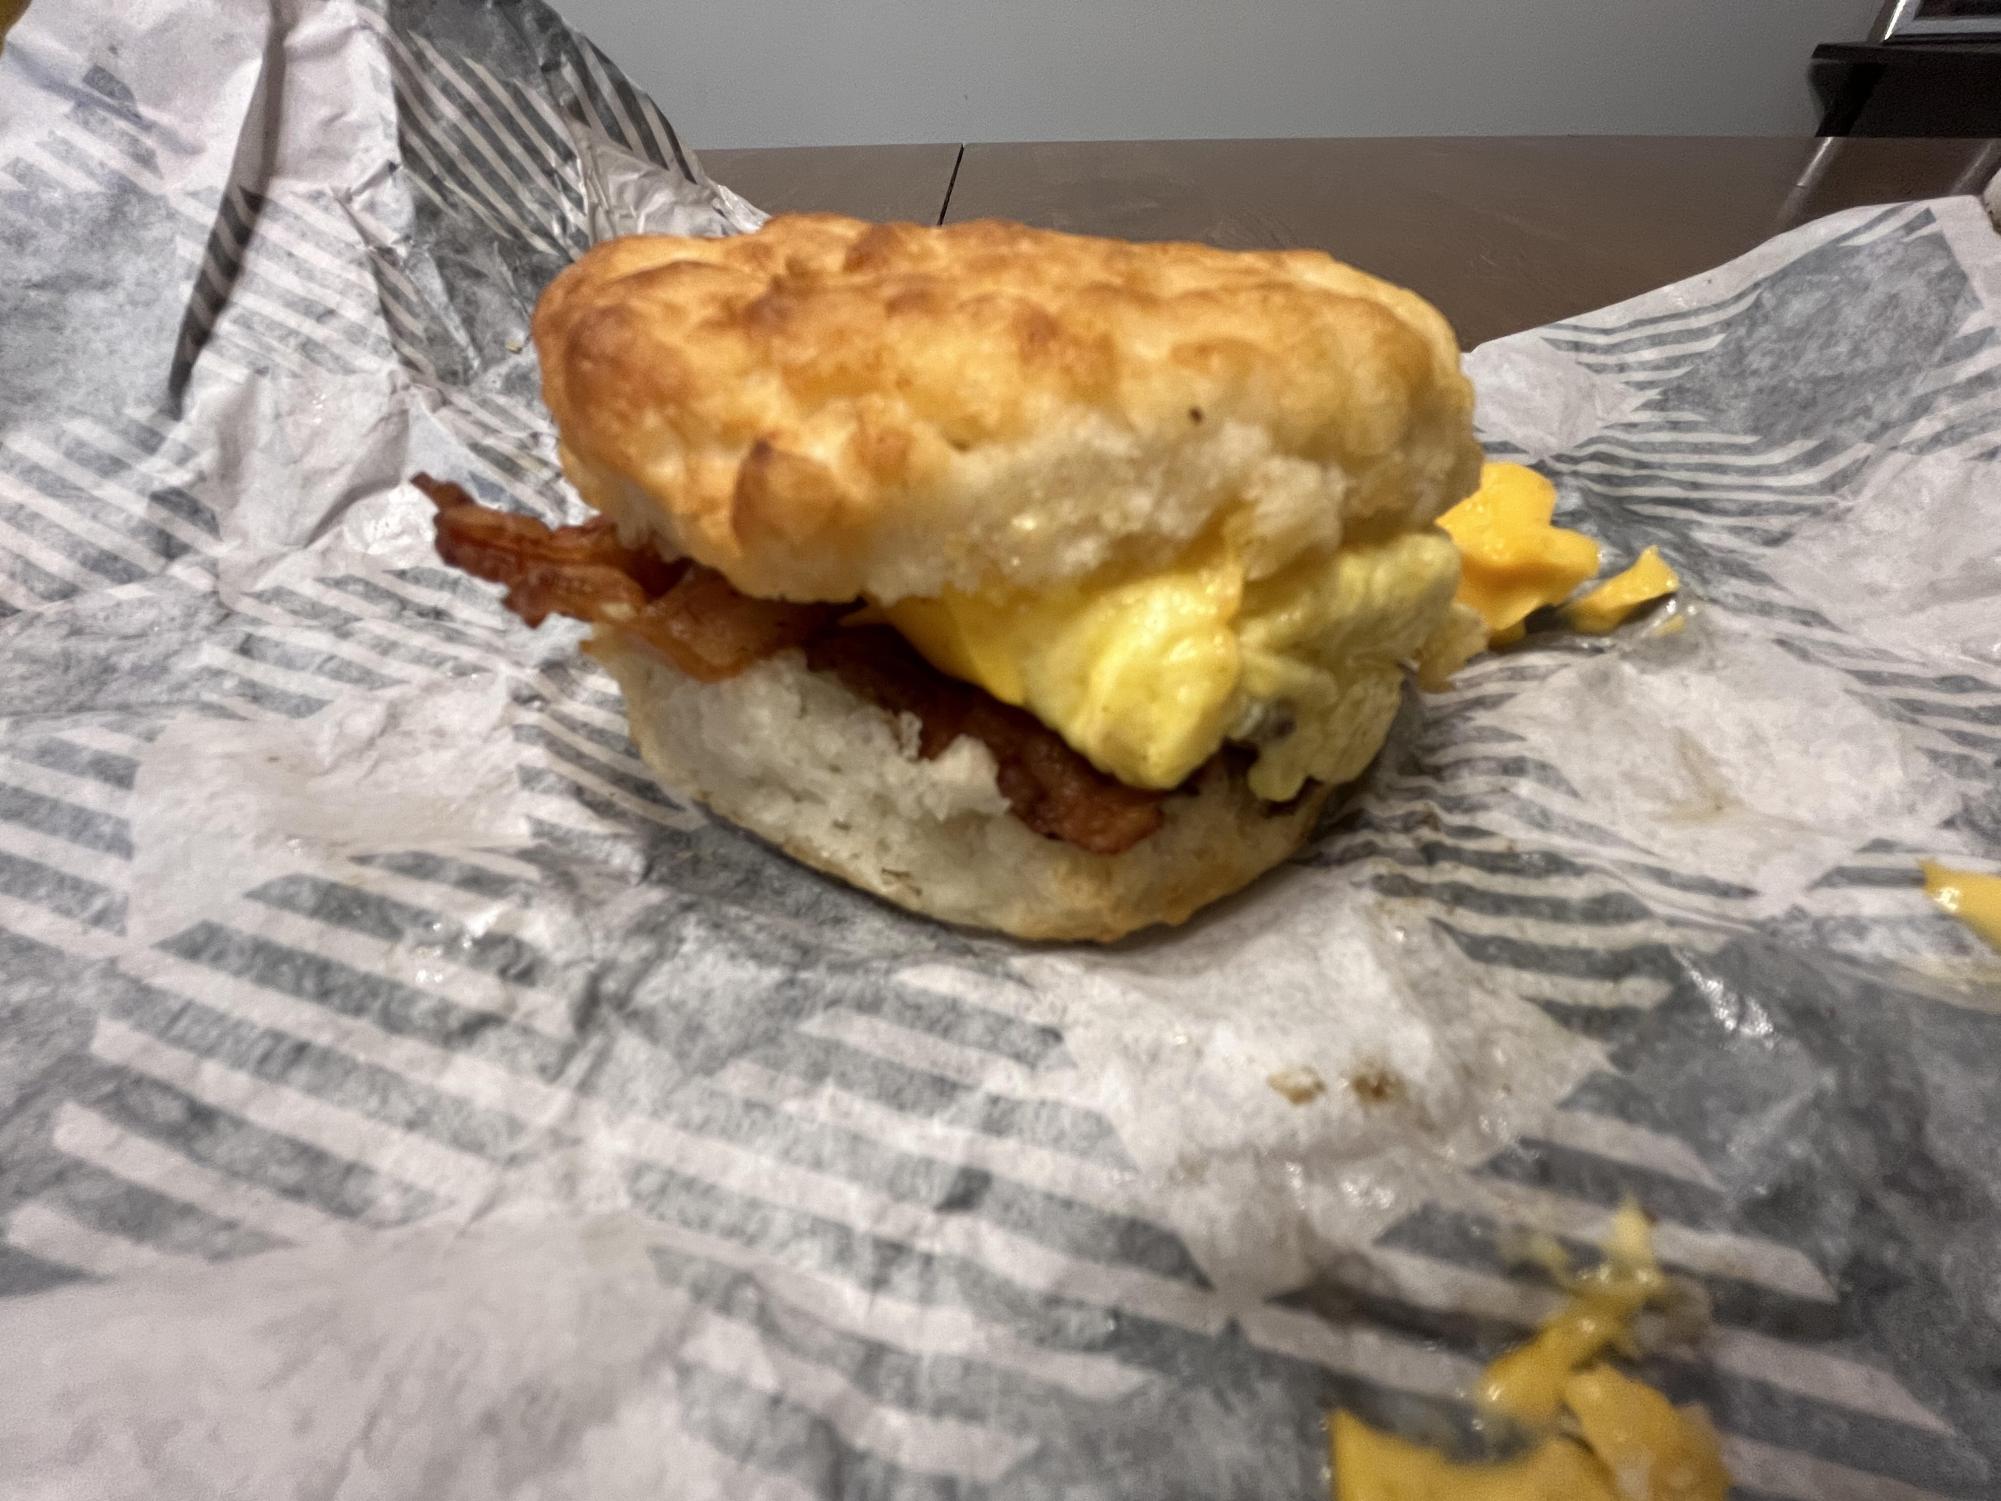 Bacon, egg, and cheese biscuit: